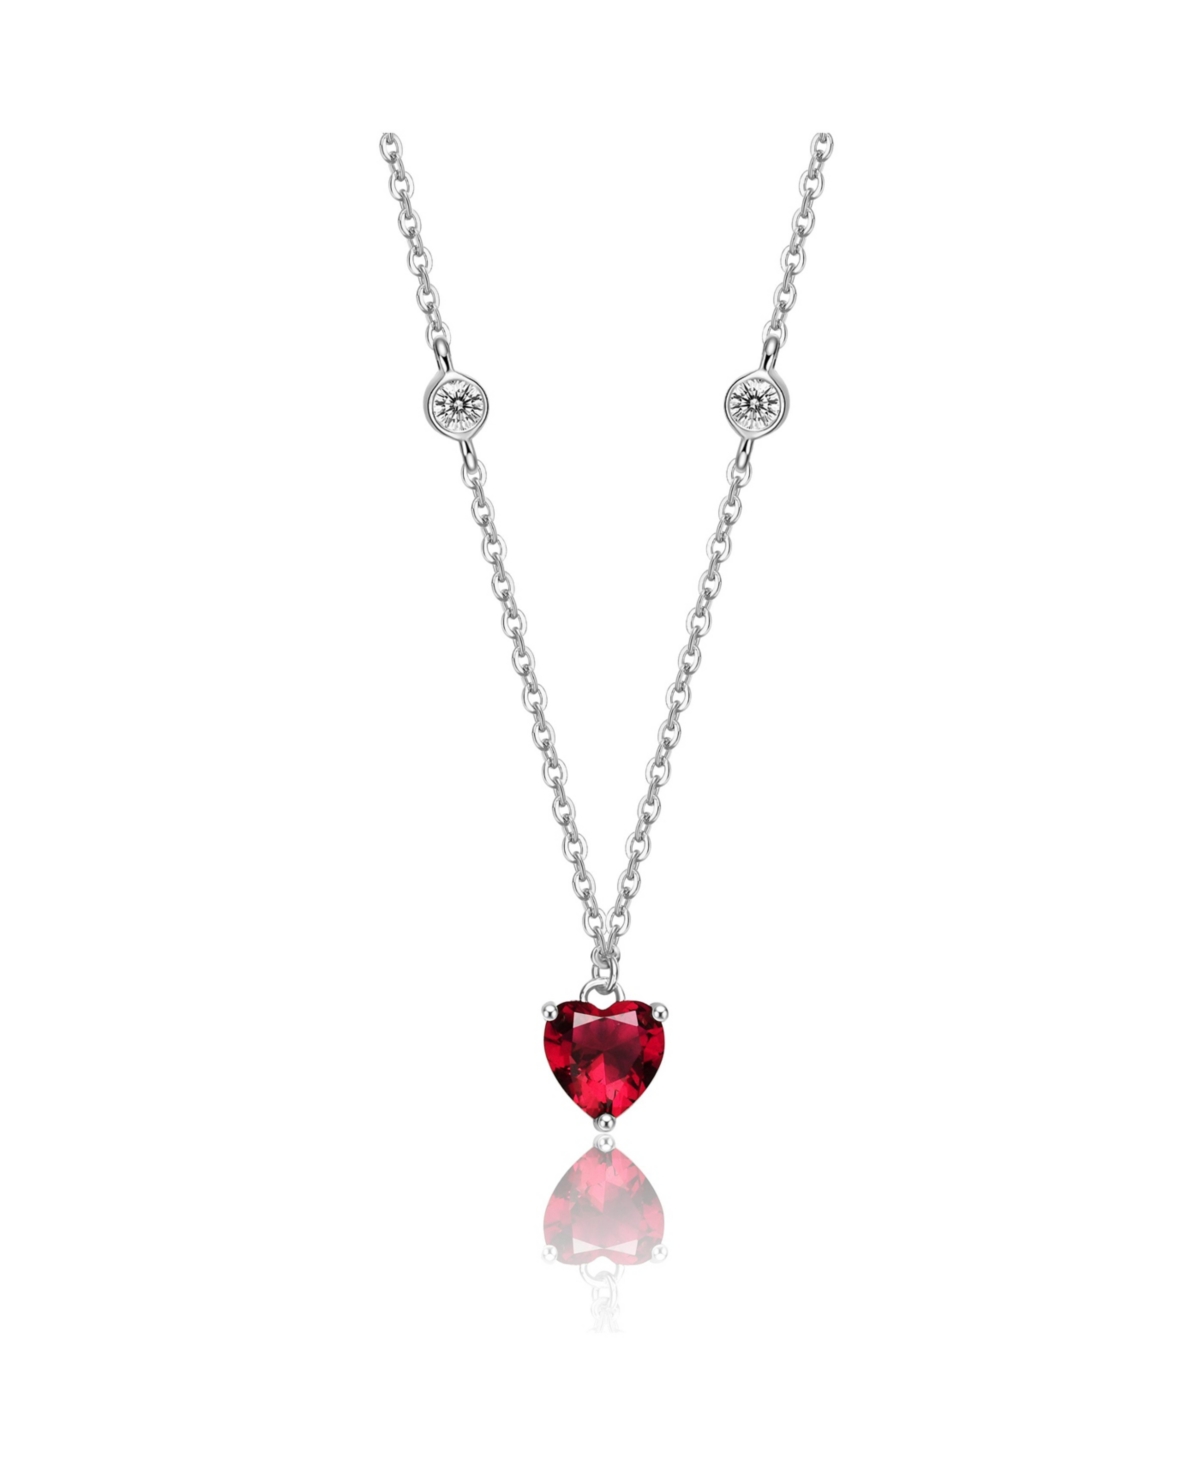 Gigi Girl Teens Sterling Silver White Gold Plated and Colored Cubic Zirconia Heart Necklace - Green